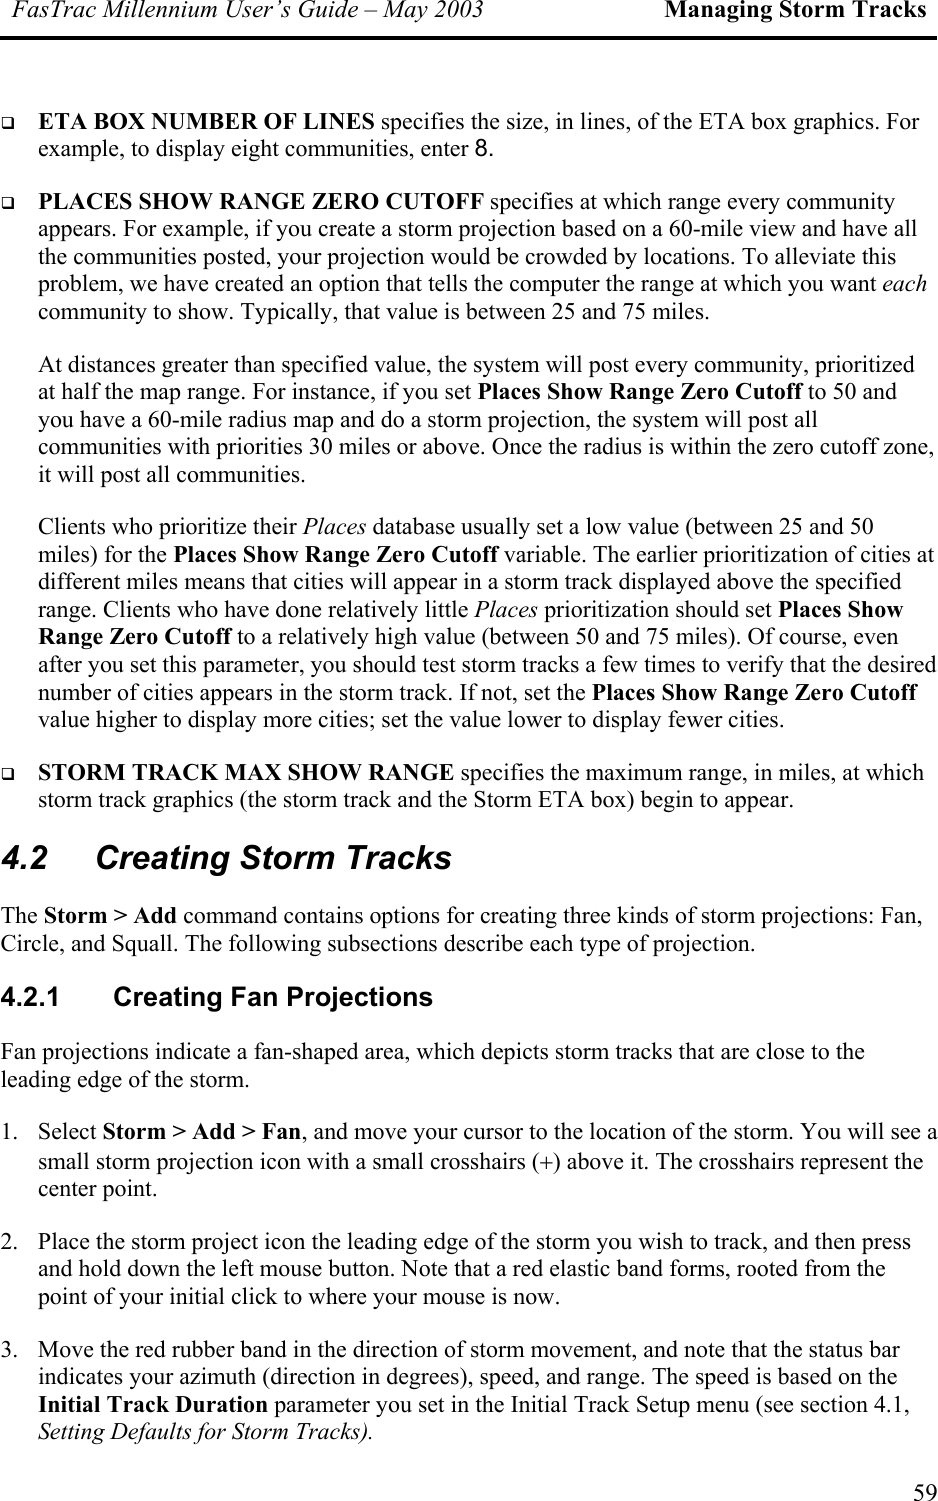 FasTrac Millennium User’s Guide – May 2003 Managing Storm Tracks   ETA BOX NUMBER OF LINES specifies the size, in lines, of the ETA box graphics. For example, to display eight communities, enter 8.   PLACES SHOW RANGE ZERO CUTOFF specifies at which range every community appears. For example, if you create a storm projection based on a 60-mile view and have all the communities posted, your projection would be crowded by locations. To alleviate this problem, we have created an option that tells the computer the range at which you want each community to show. Typically, that value is between 25 and 75 miles.  At distances greater than specified value, the system will post every community, prioritized at half the map range. For instance, if you set Places Show Range Zero Cutoff to 50 and you have a 60-mile radius map and do a storm projection, the system will post all communities with priorities 30 miles or above. Once the radius is within the zero cutoff zone, it will post all communities. Clients who prioritize their Places database usually set a low value (between 25 and 50 miles) for the Places Show Range Zero Cutoff variable. The earlier prioritization of cities at different miles means that cities will appear in a storm track displayed above the specified range. Clients who have done relatively little Places prioritization should set Places Show Range Zero Cutoff to a relatively high value (between 50 and 75 miles). Of course, even after you set this parameter, you should test storm tracks a few times to verify that the desired number of cities appears in the storm track. If not, set the Places Show Range Zero Cutoff value higher to display more cities; set the value lower to display fewer cities.   STORM TRACK MAX SHOW RANGE specifies the maximum range, in miles, at which storm track graphics (the storm track and the Storm ETA box) begin to appear. 4.2  Creating Storm Tracks The Storm &gt; Add command contains options for creating three kinds of storm projections: Fan, Circle, and Squall. The following subsections describe each type of projection. 4.2.1 Creating Fan Projections Fan projections indicate a fan-shaped area, which depicts storm tracks that are close to the leading edge of the storm. 1. Select Storm &gt; Add &gt; Fan, and move your cursor to the location of the storm. You will see a small storm projection icon with a small crosshairs (+) above it. The crosshairs represent the center point. 2.  Place the storm project icon the leading edge of the storm you wish to track, and then press and hold down the left mouse button. Note that a red elastic band forms, rooted from the point of your initial click to where your mouse is now.  3.  Move the red rubber band in the direction of storm movement, and note that the status bar indicates your azimuth (direction in degrees), speed, and range. The speed is based on the Initial Track Duration parameter you set in the Initial Track Setup menu (see section 4.1, Setting Defaults for Storm Tracks). 59 